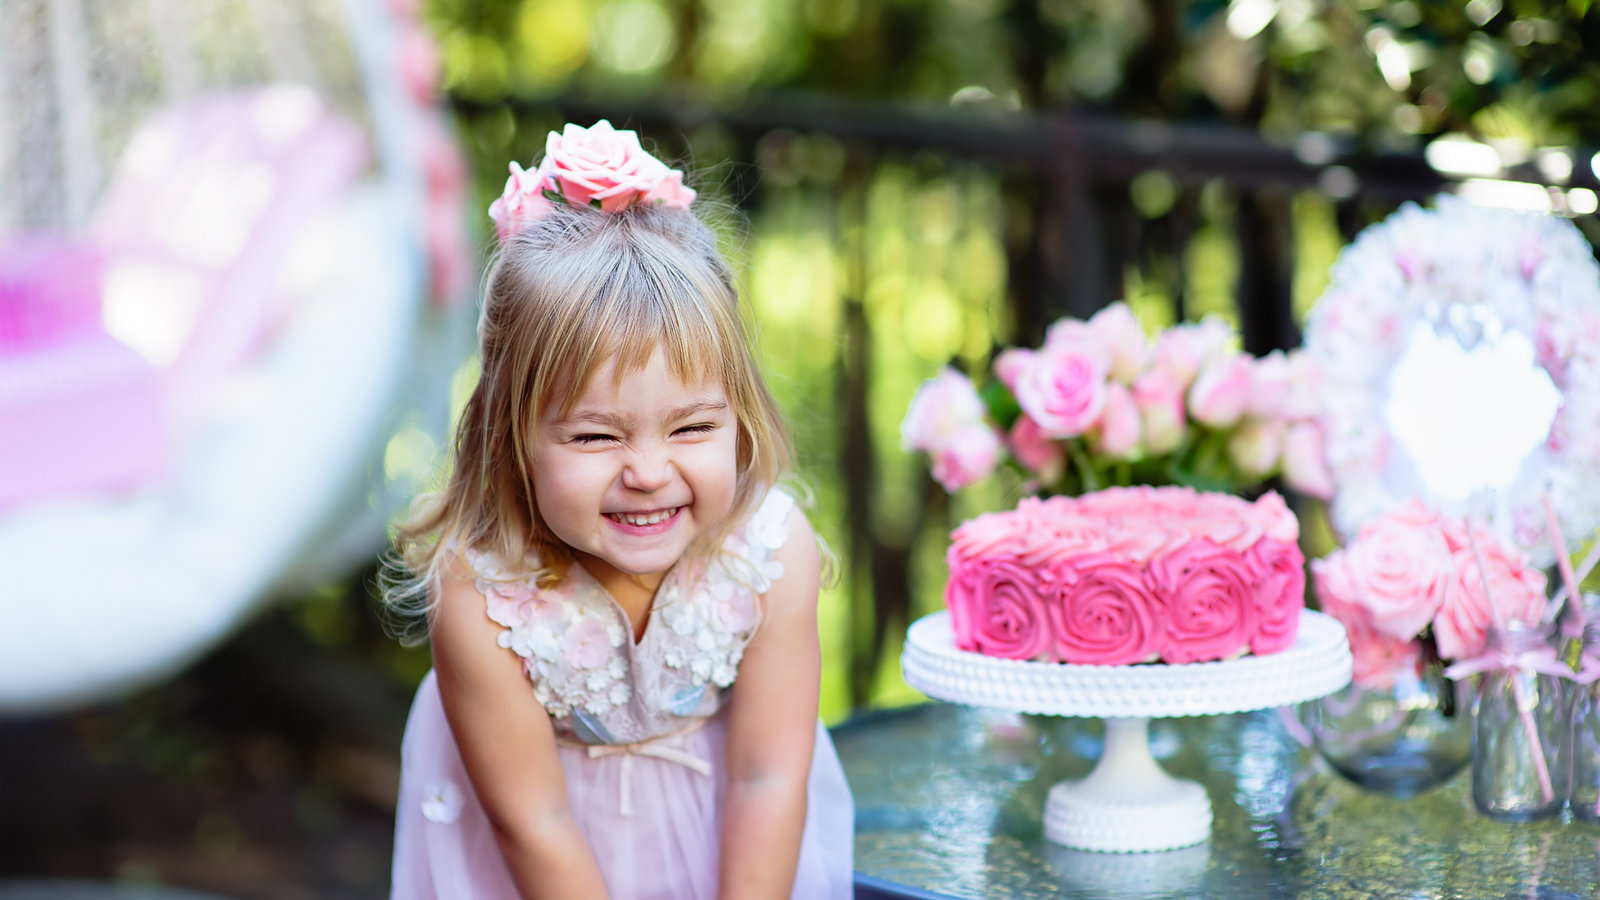 Birthday Party Ideas for Girls | www.justmommies.com